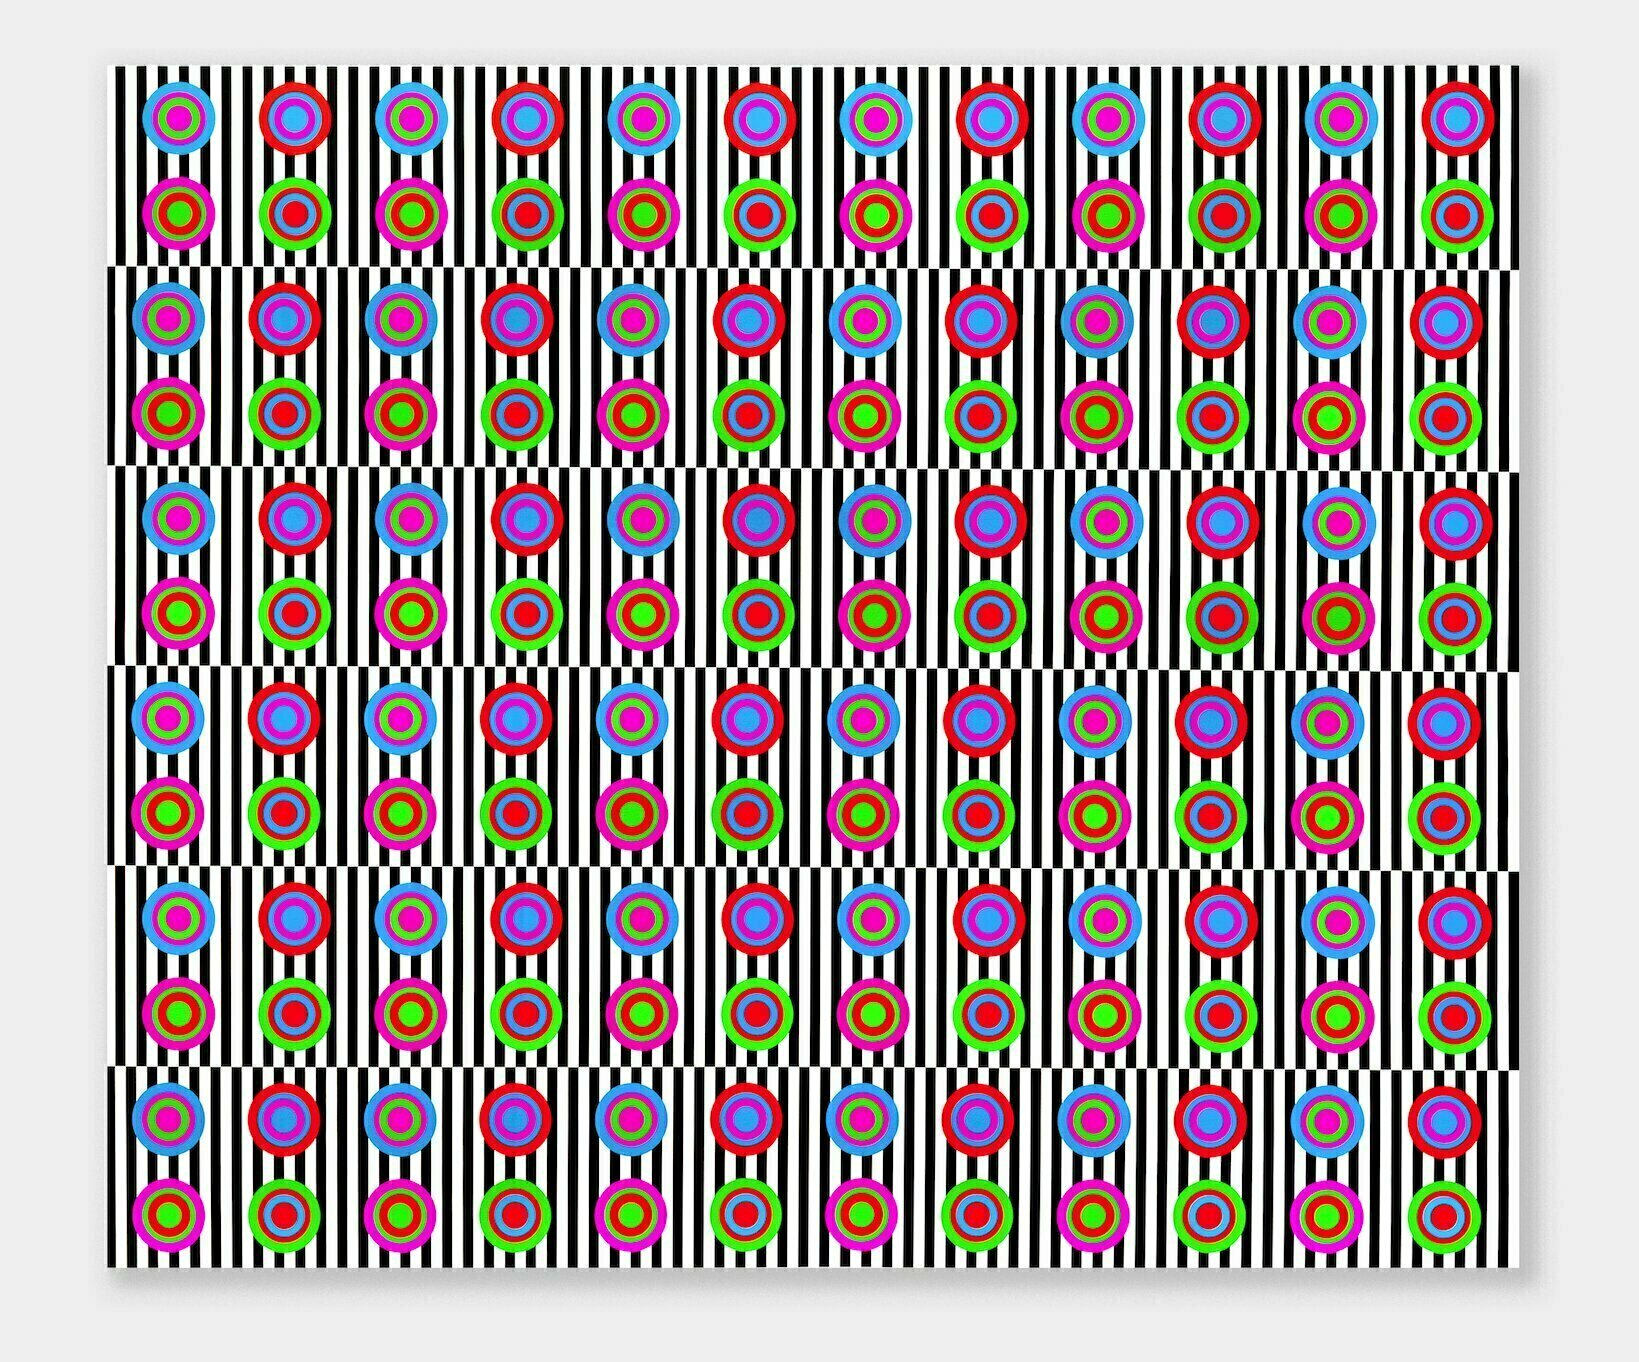 Youri Messen-Jaschin; Quantique, 2022, Original Printmaking Serigraph, 170 x 200 cm. Artwork description: 241 Op art - Optical art - Edition One print1 1 - Silkscreen on linen canvas A(c) 2022 Youri Messen- Jaschin A(r) Prolitteris Zurich photography @ vincentmullerphotosPackaging, insurance and transport is not included in the price, it is additional.  I work with a carrier, he is responsible for all my shipments.  The costs ...